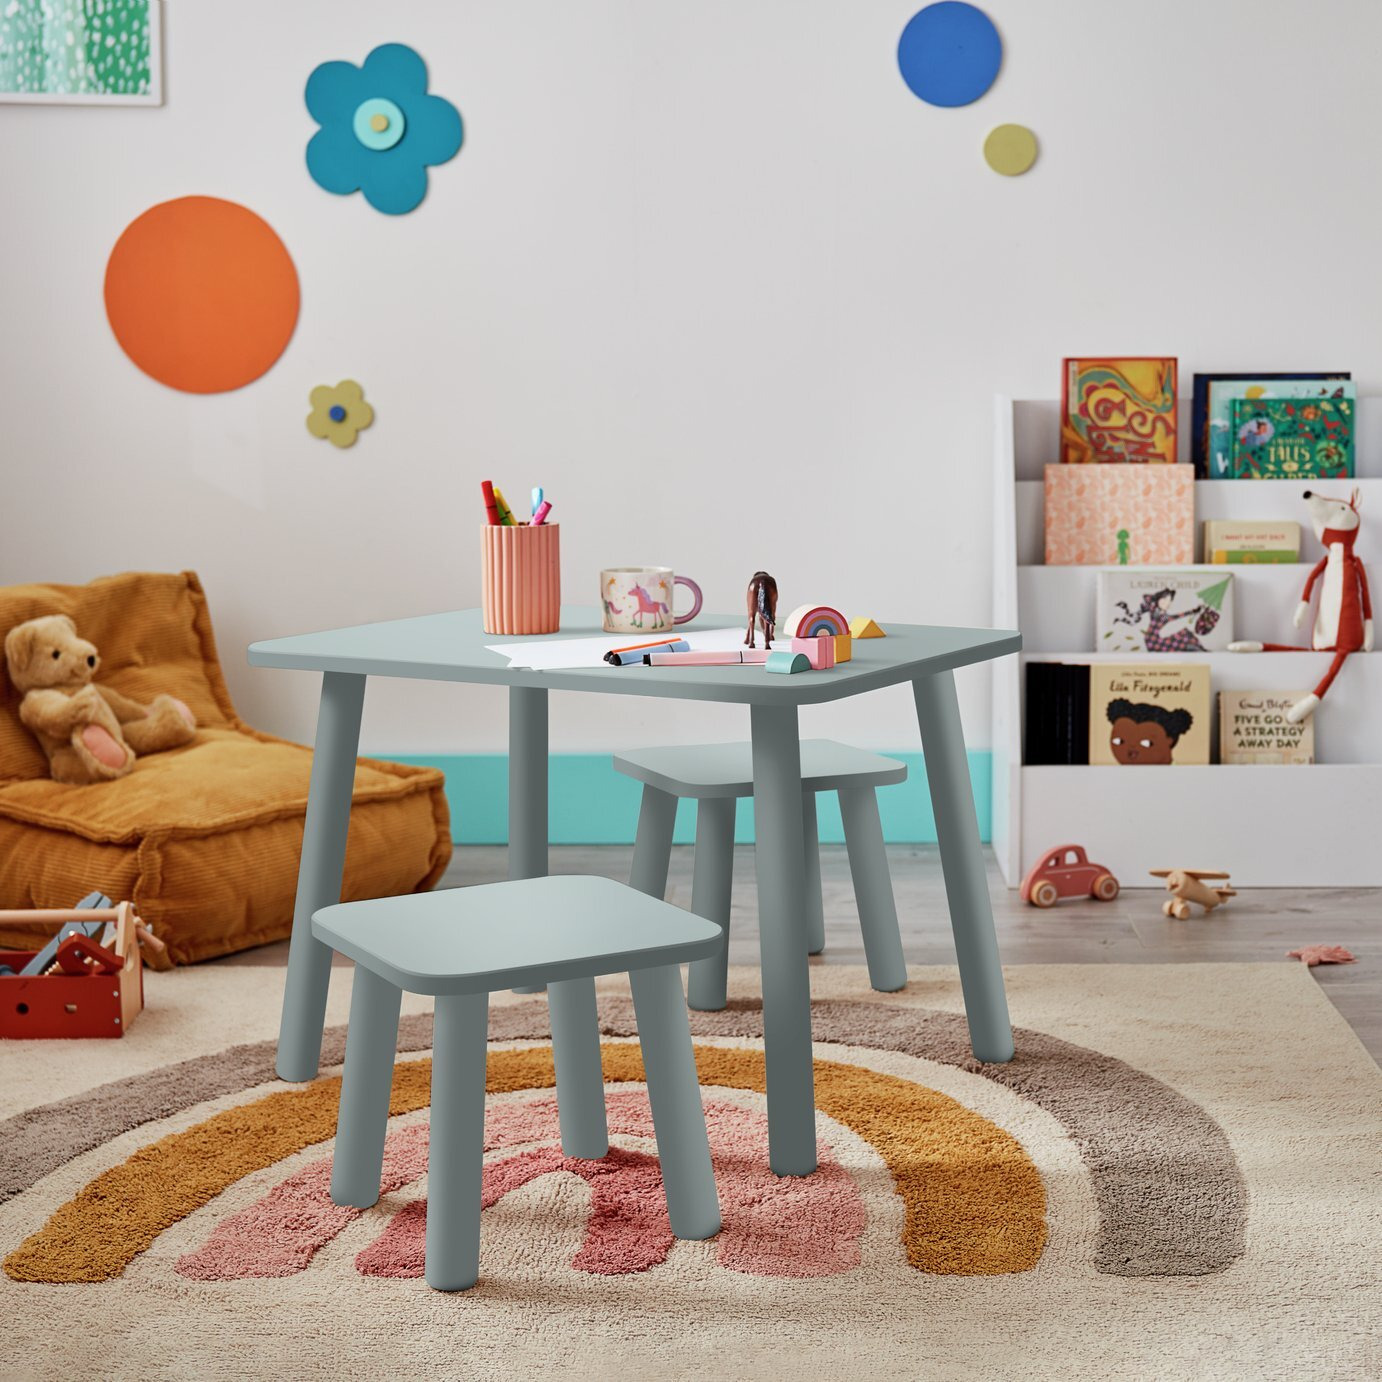 Habitat Kids Felix Table and 2 Chair - Green - image 1